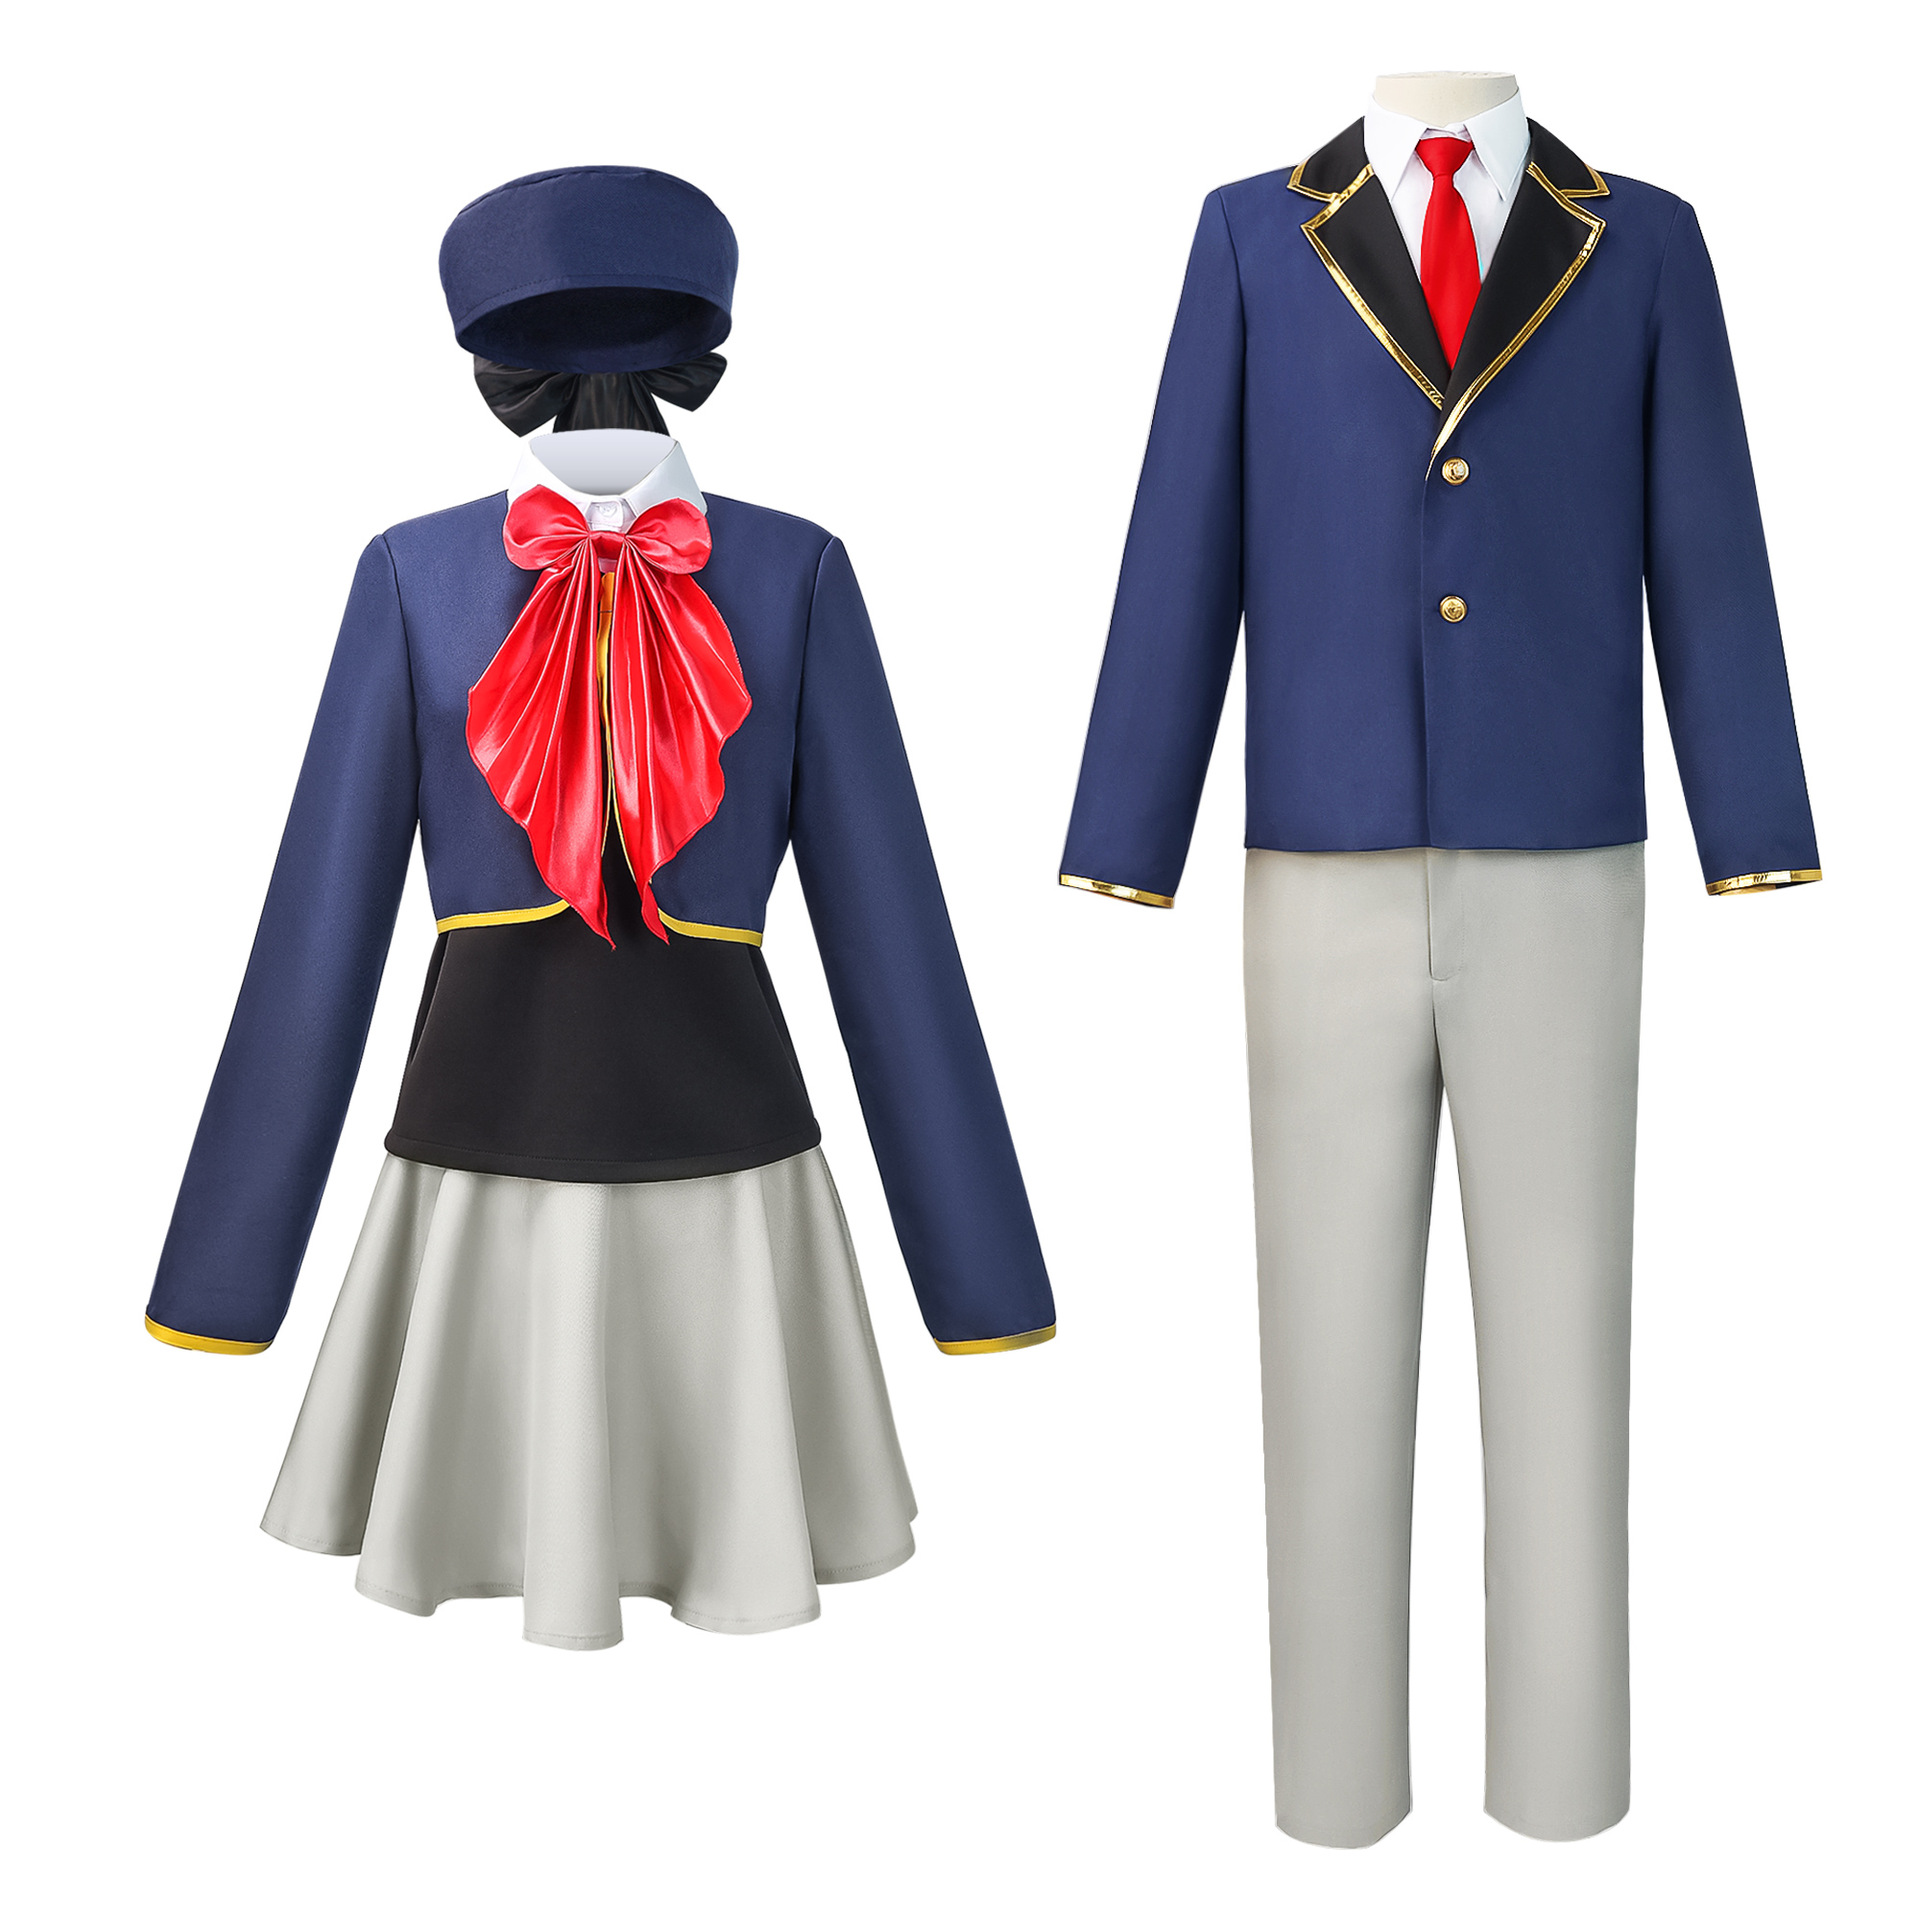 The children's cosplay costumes I recommend are Hoshino Ai, Aqua, Hoshino Ruby, and Magana cosplay costumes.